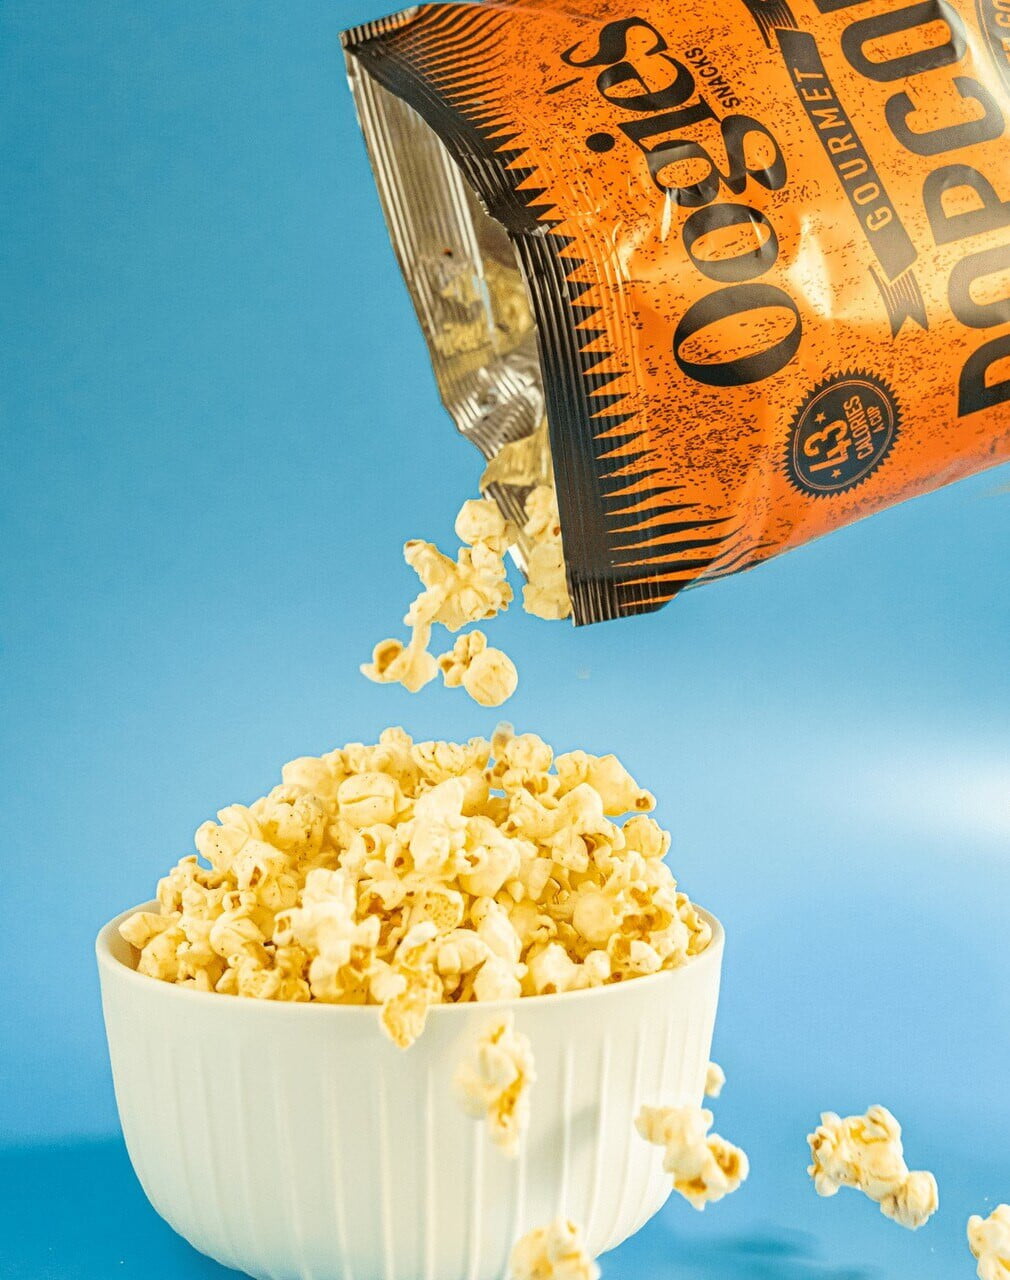 Hickory smoked gouda popcorn poured in bowl